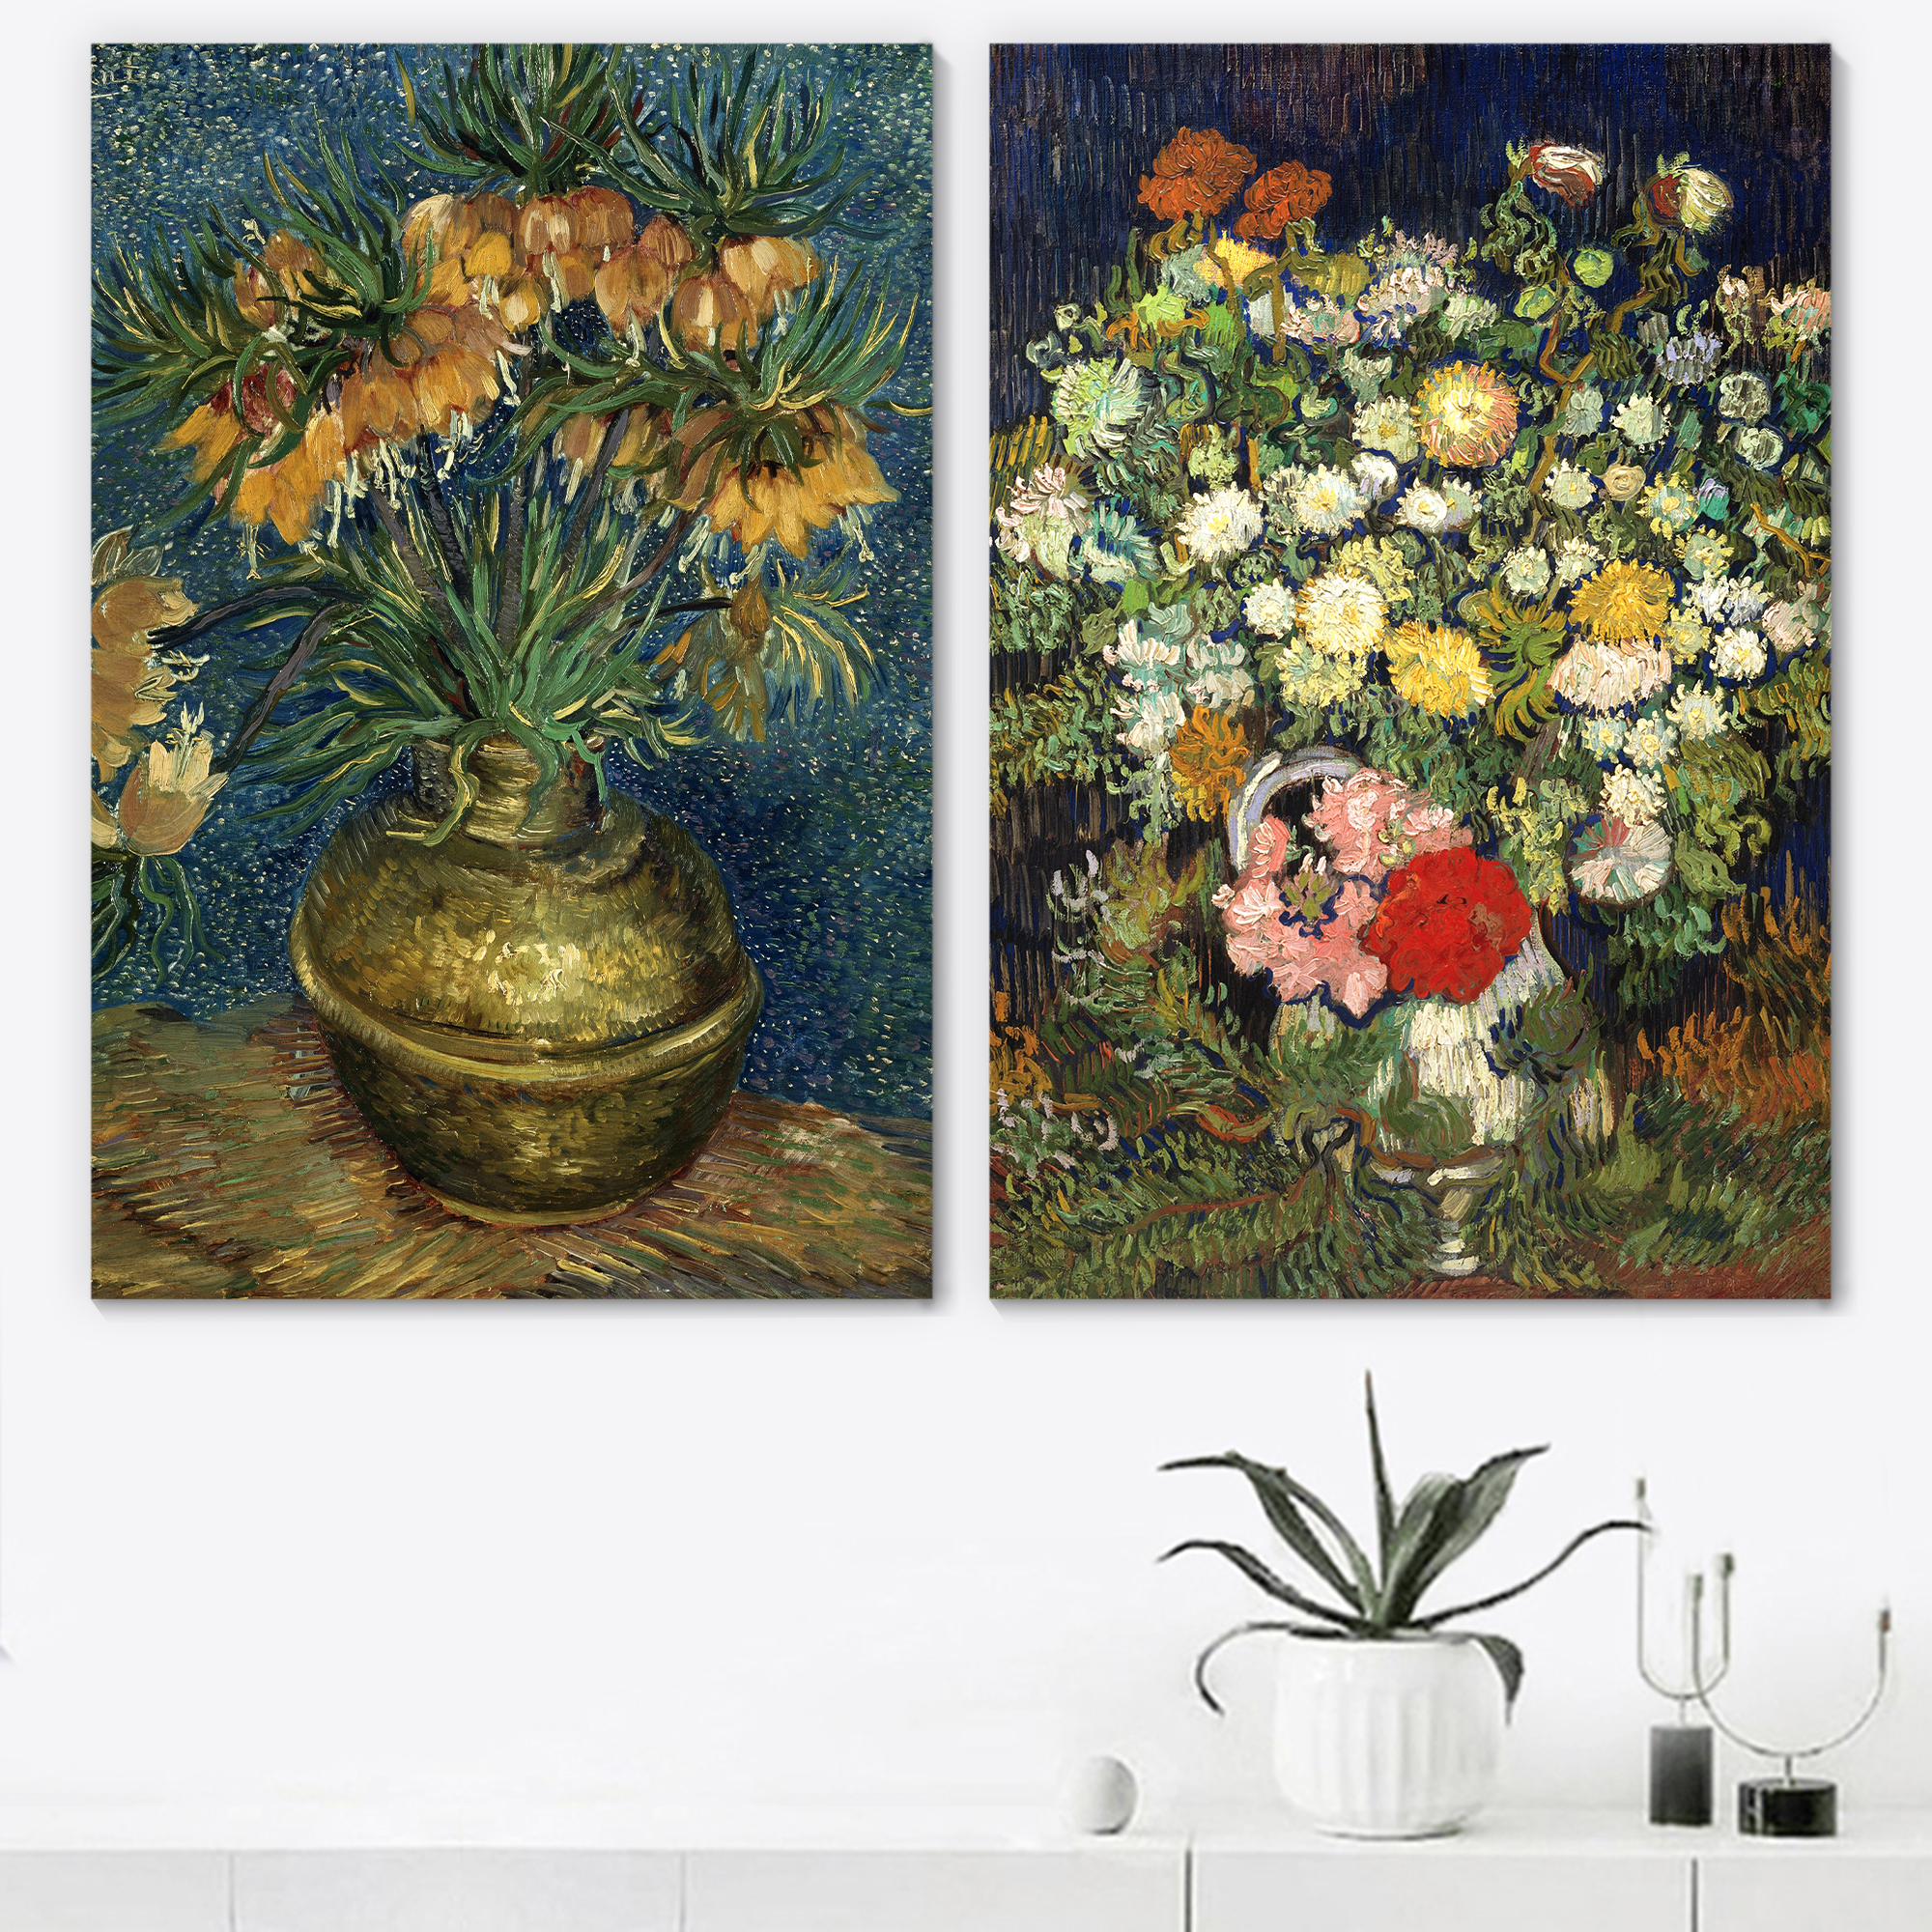 Wall26 - Still life of Flowers in Vase by Vincent Van Gogh - Oil Painting Reproduction in Set of 2 | Canvas Prints Wall Art, Ready to Hang - 16